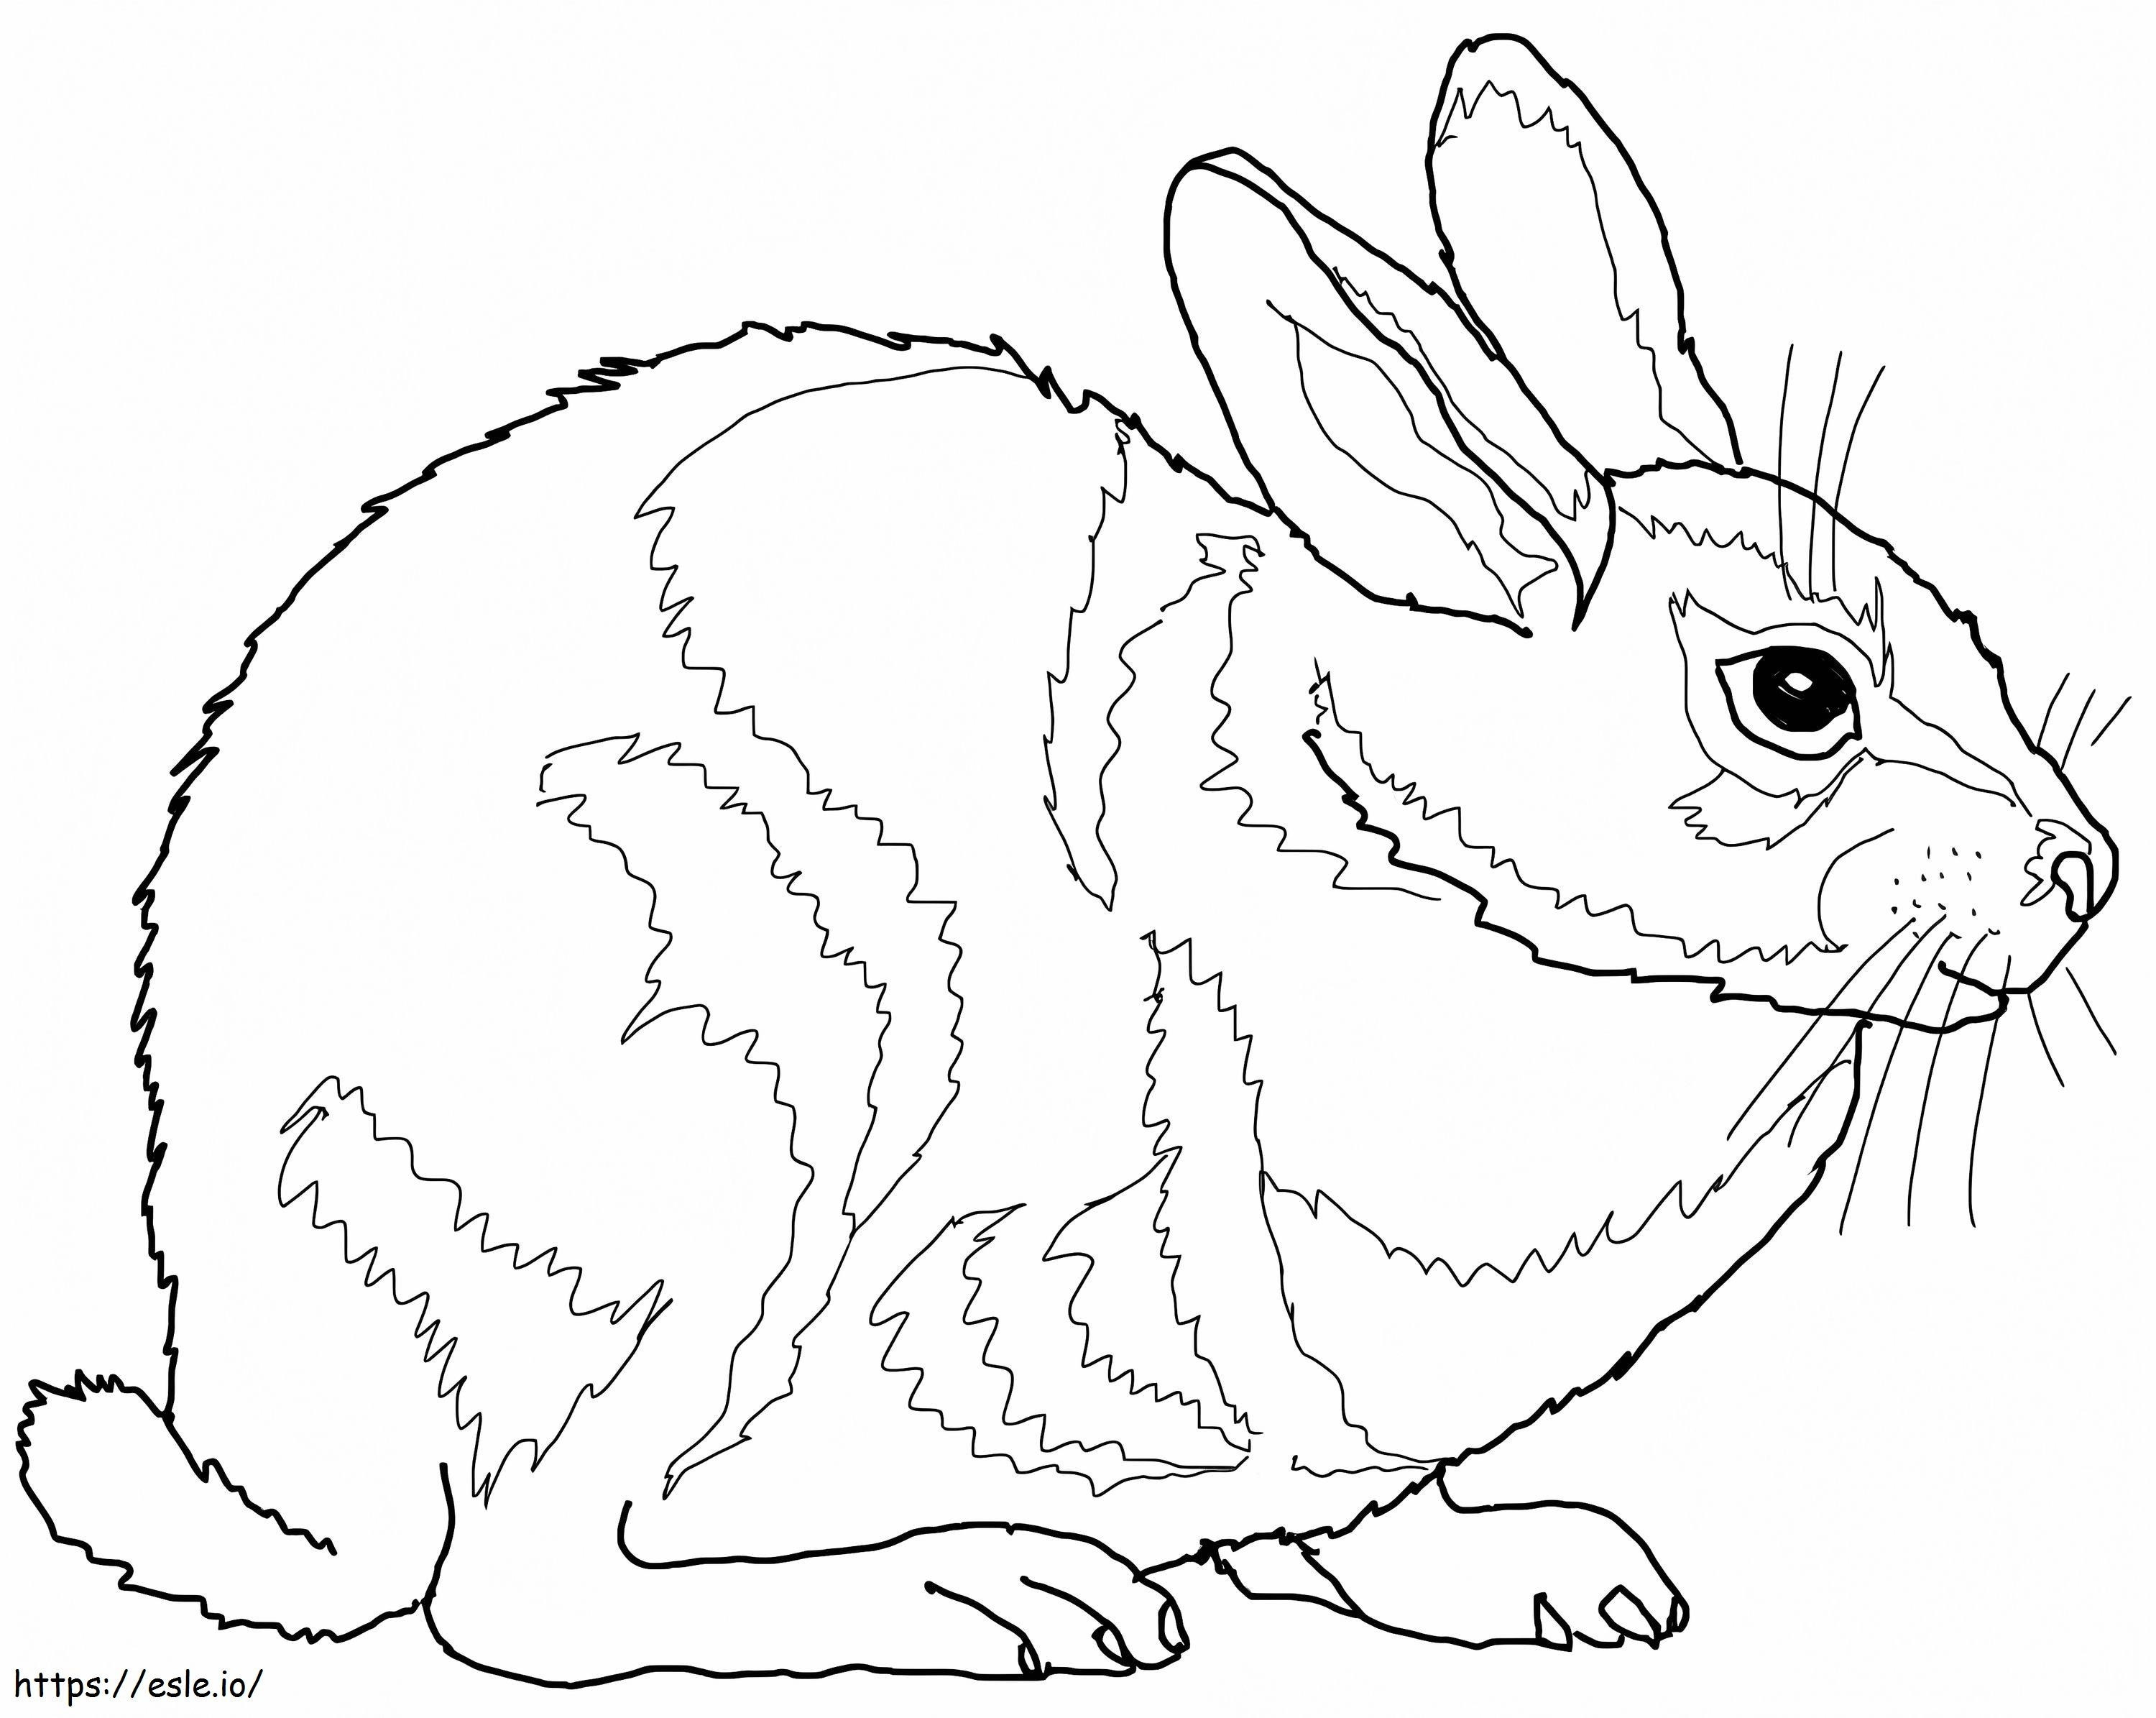 Cottontail Rabbit coloring page